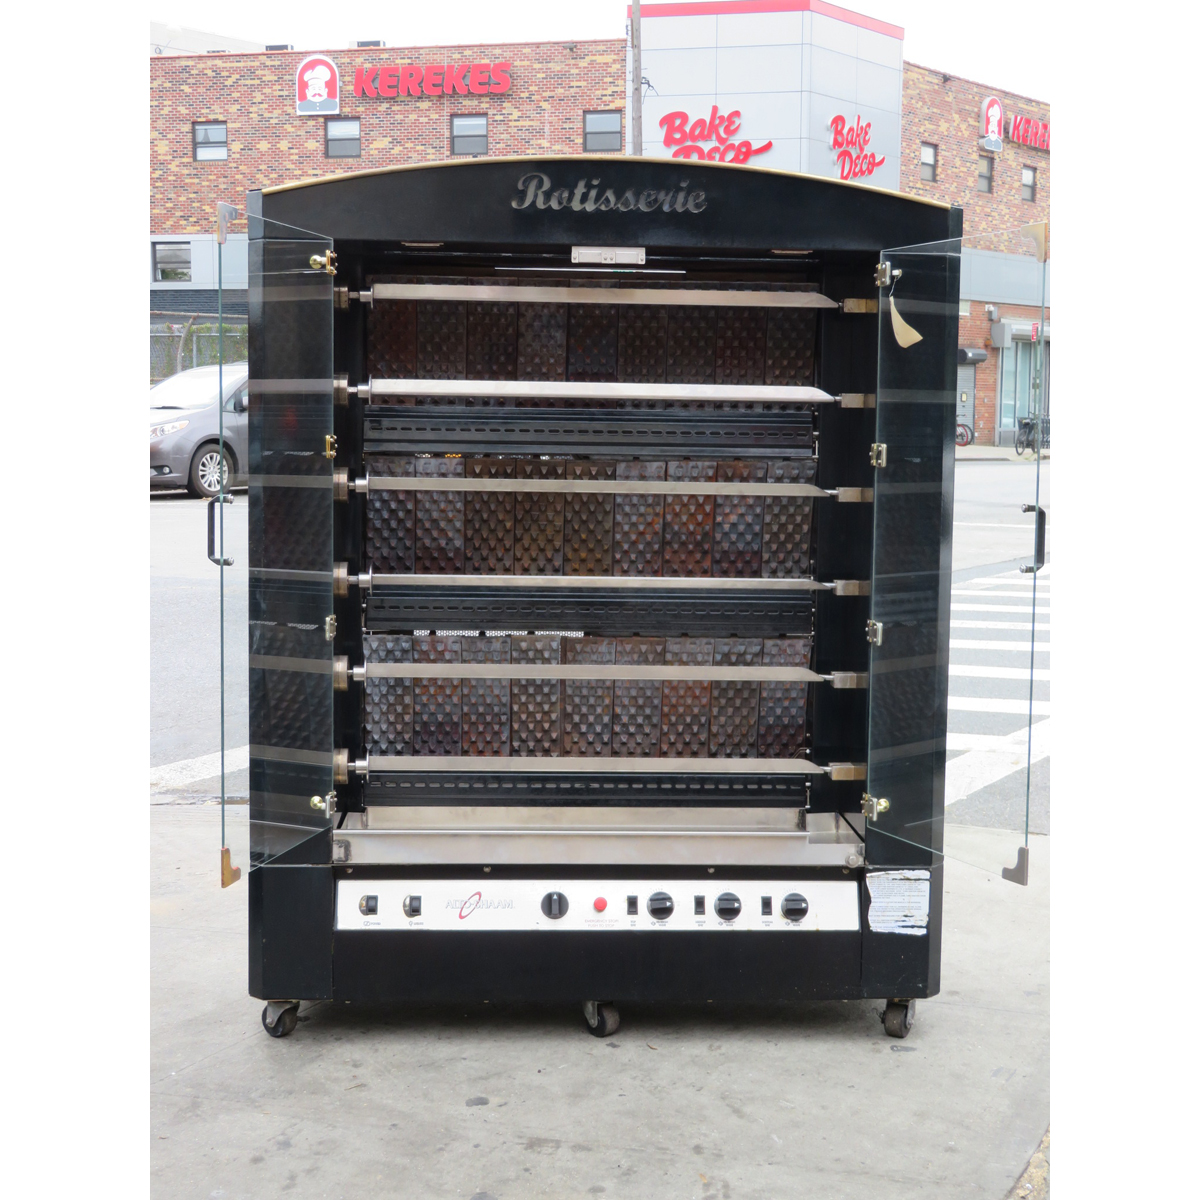 Alto Shaam AR-6G Vertical Gas Rotisserie with 6 Spits, Used Excellent Condition image 1